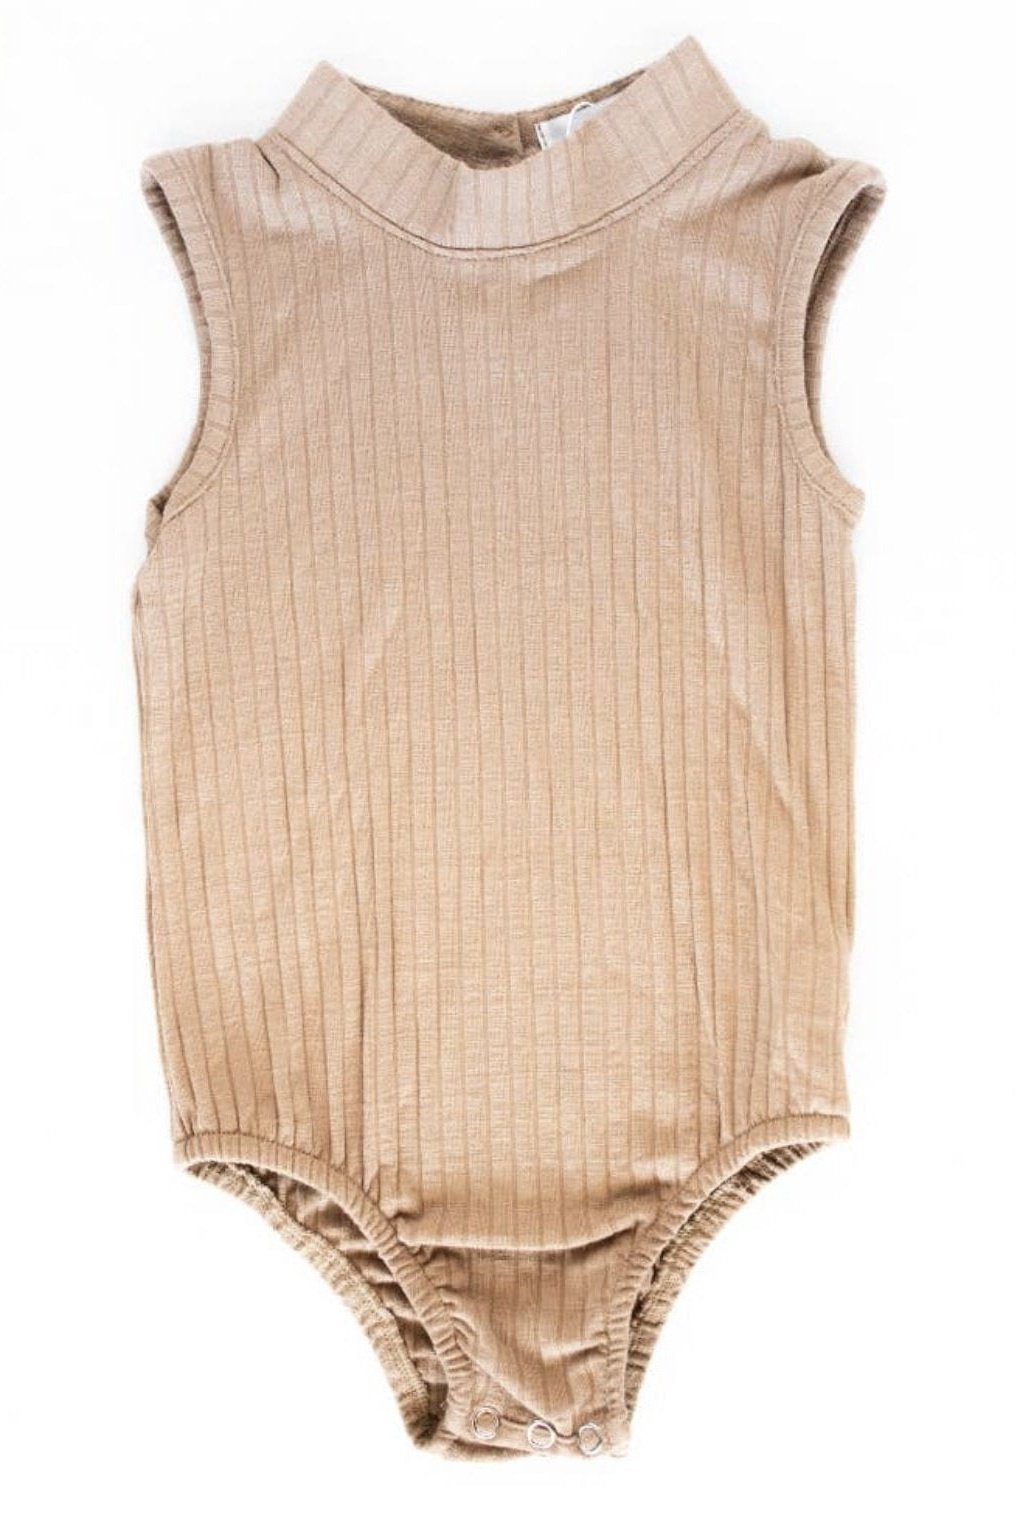 Bailey's Blossoms | Kenli High Neck Ribbed Leotard - Maple Sugar